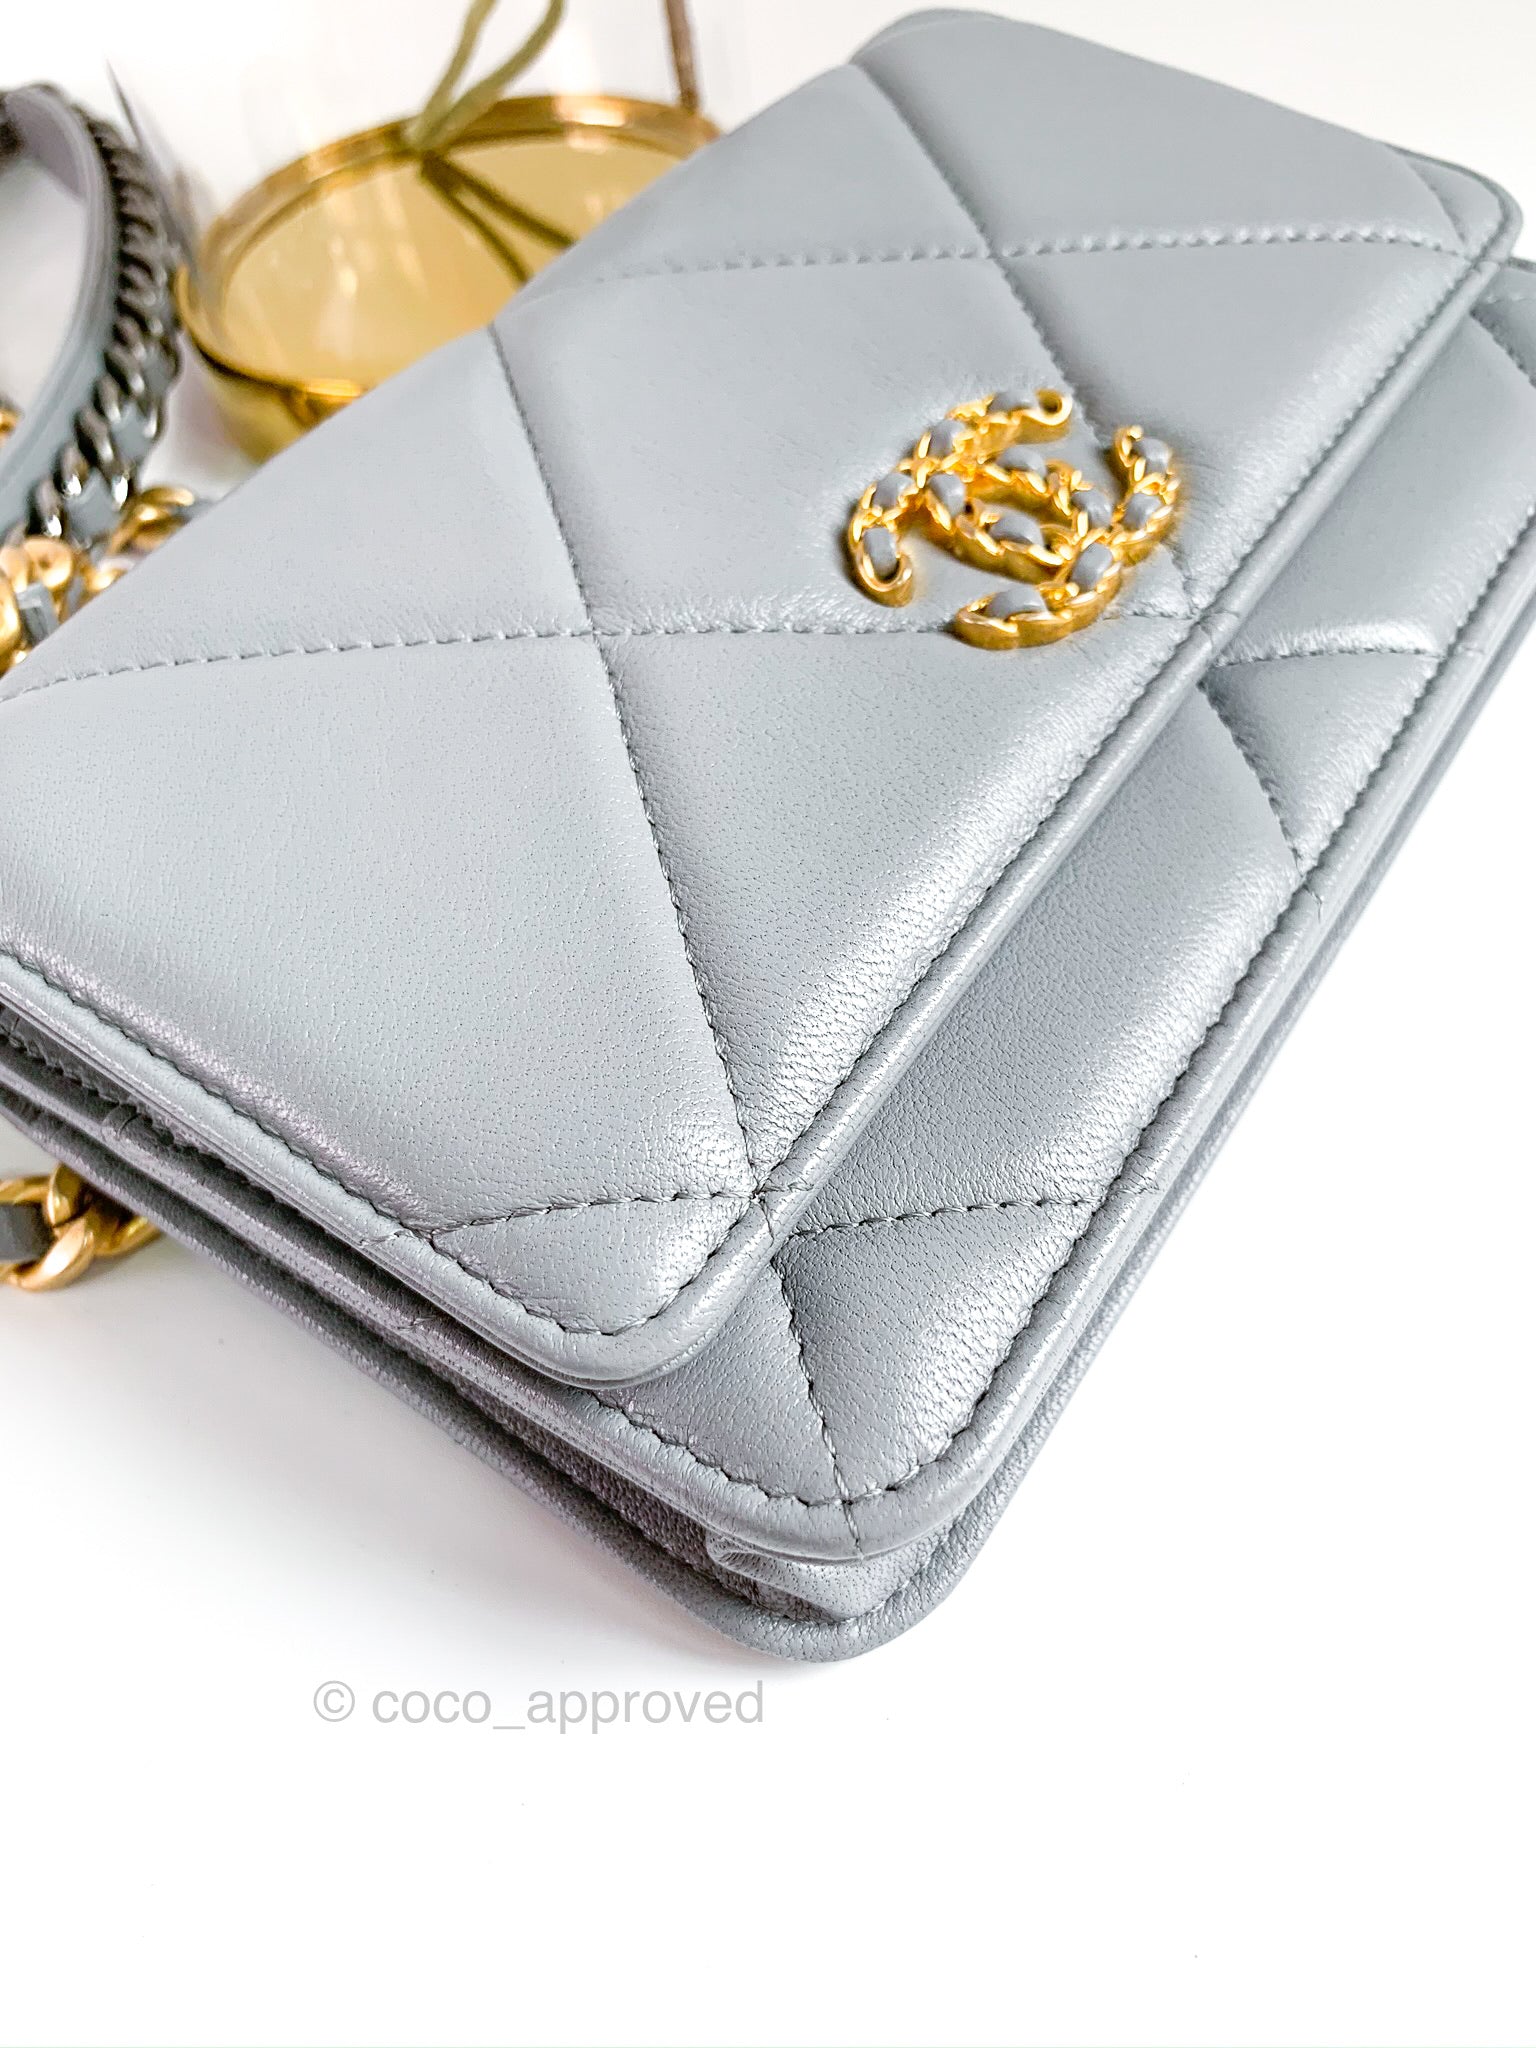 Chanel 19 WOC With Coin Purse